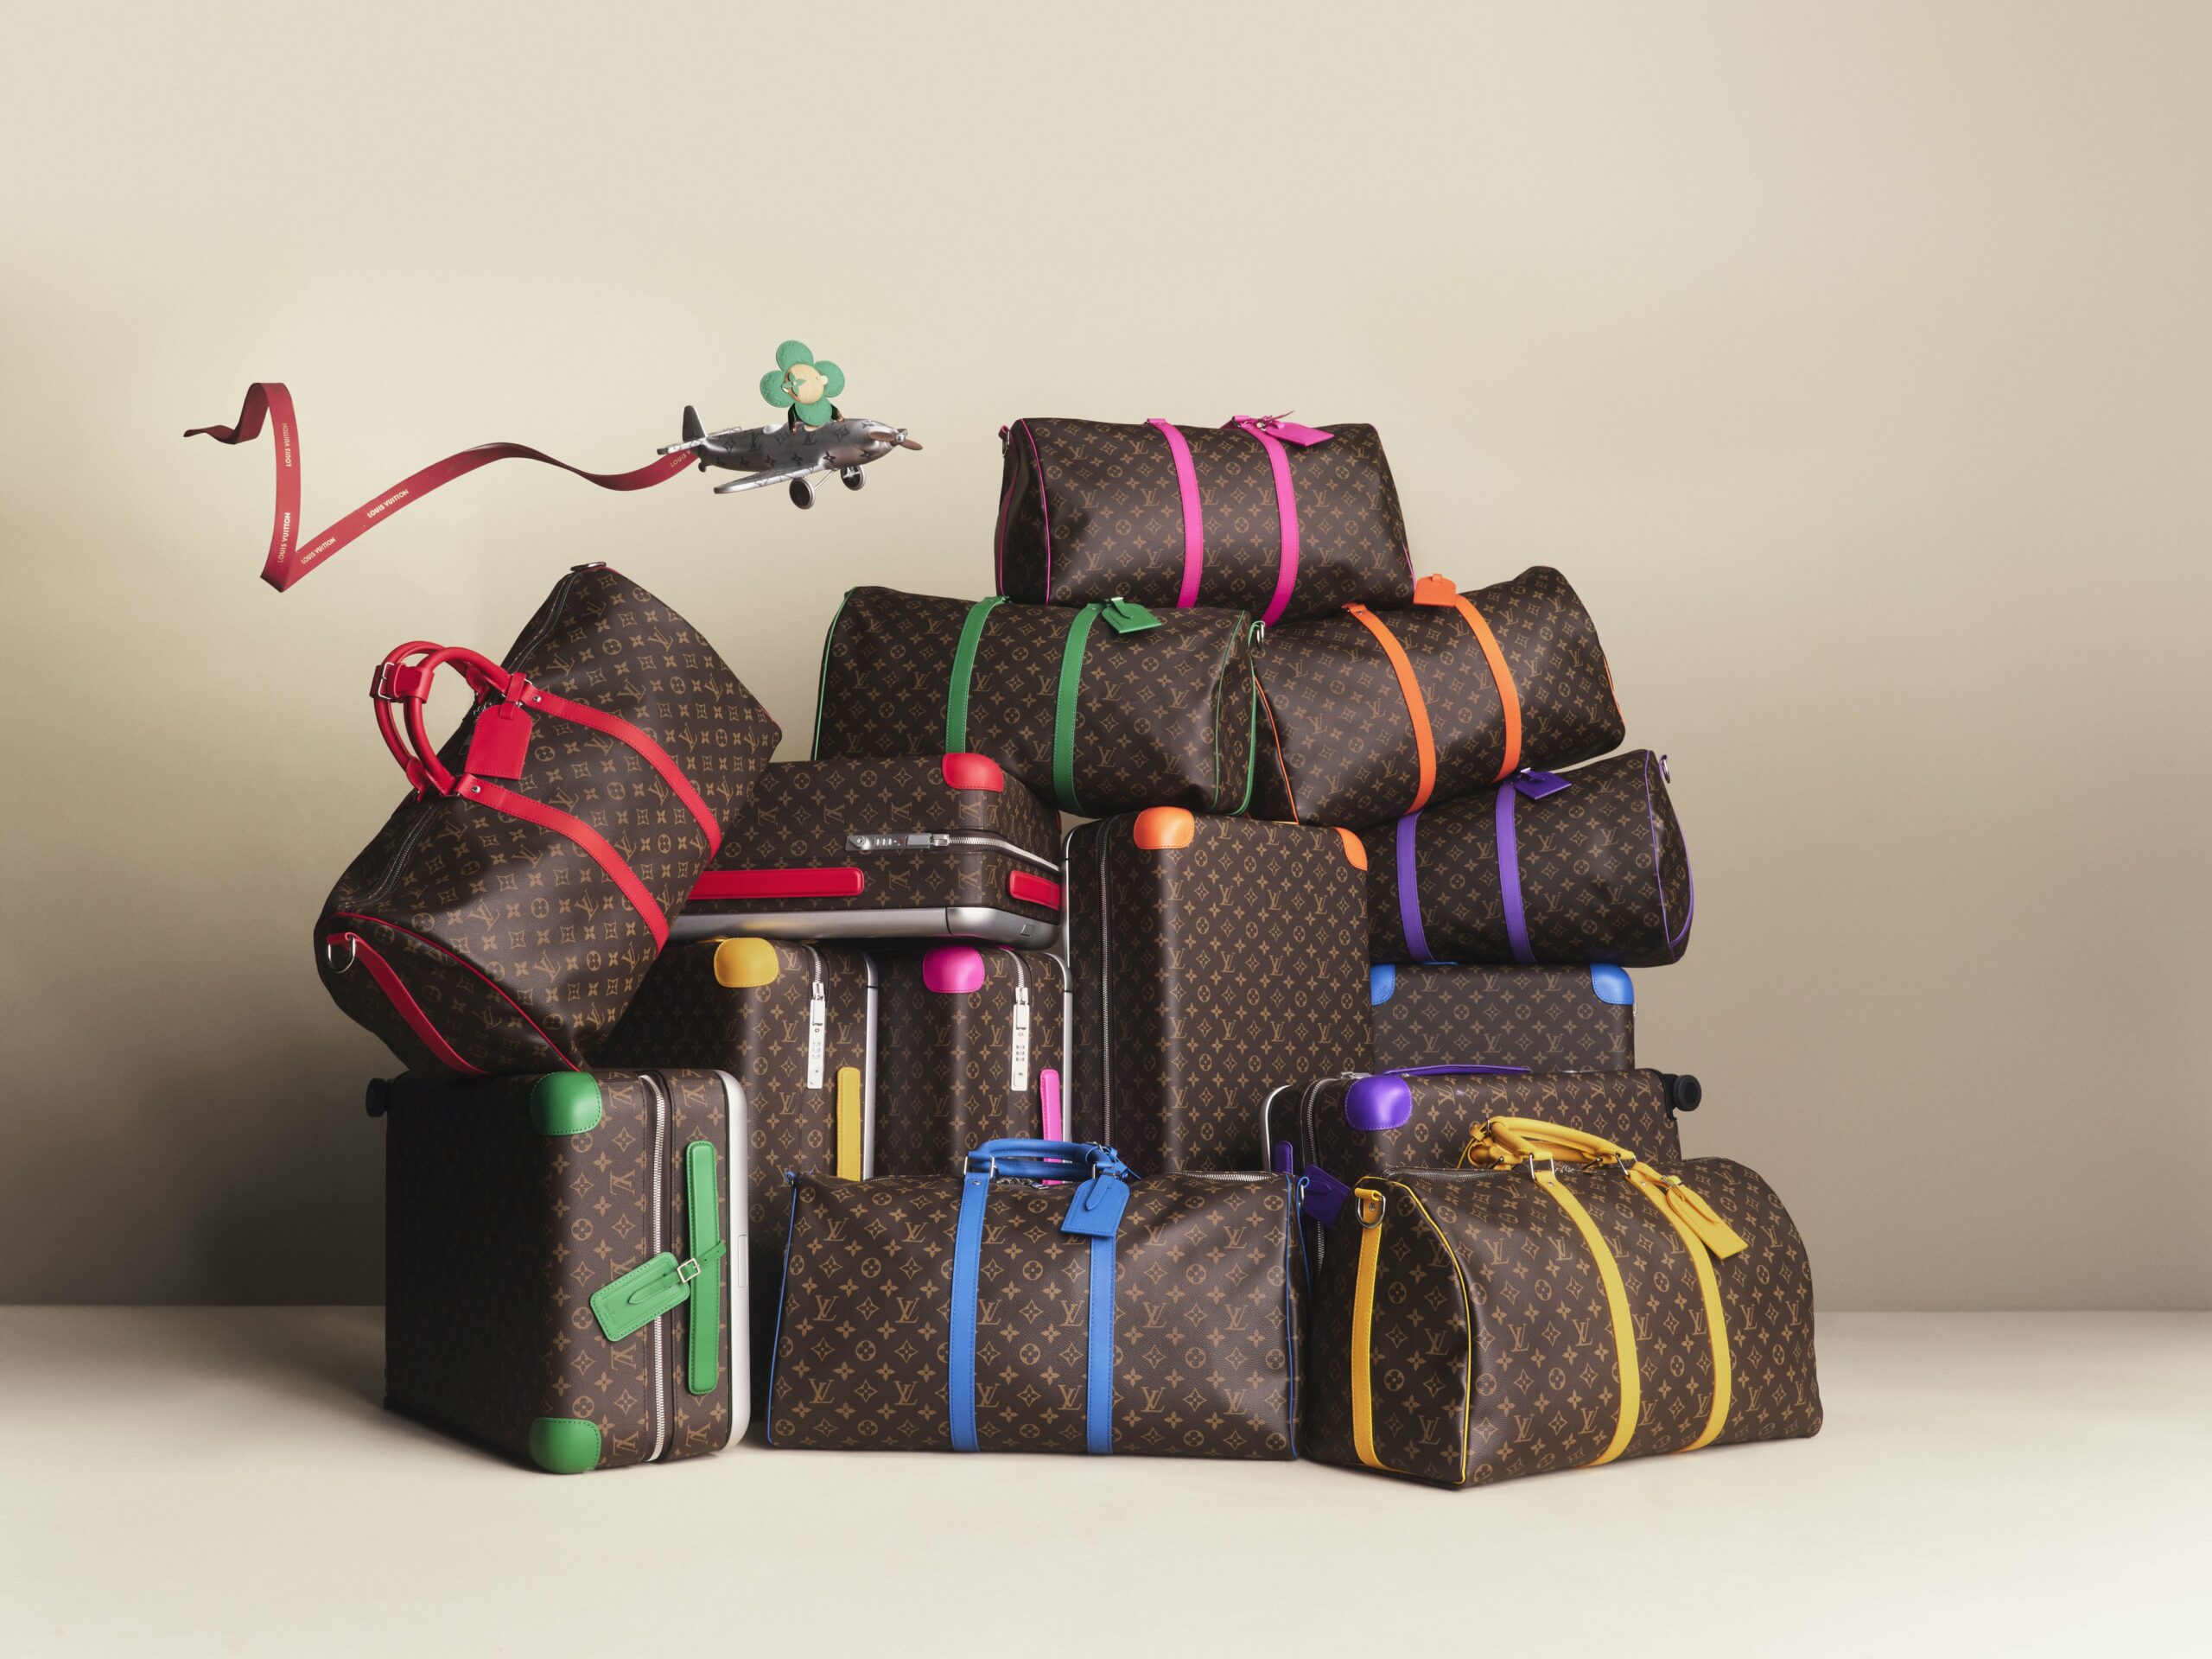 Louis Vuitton Introduces Colourful Luggage + More Fashion News